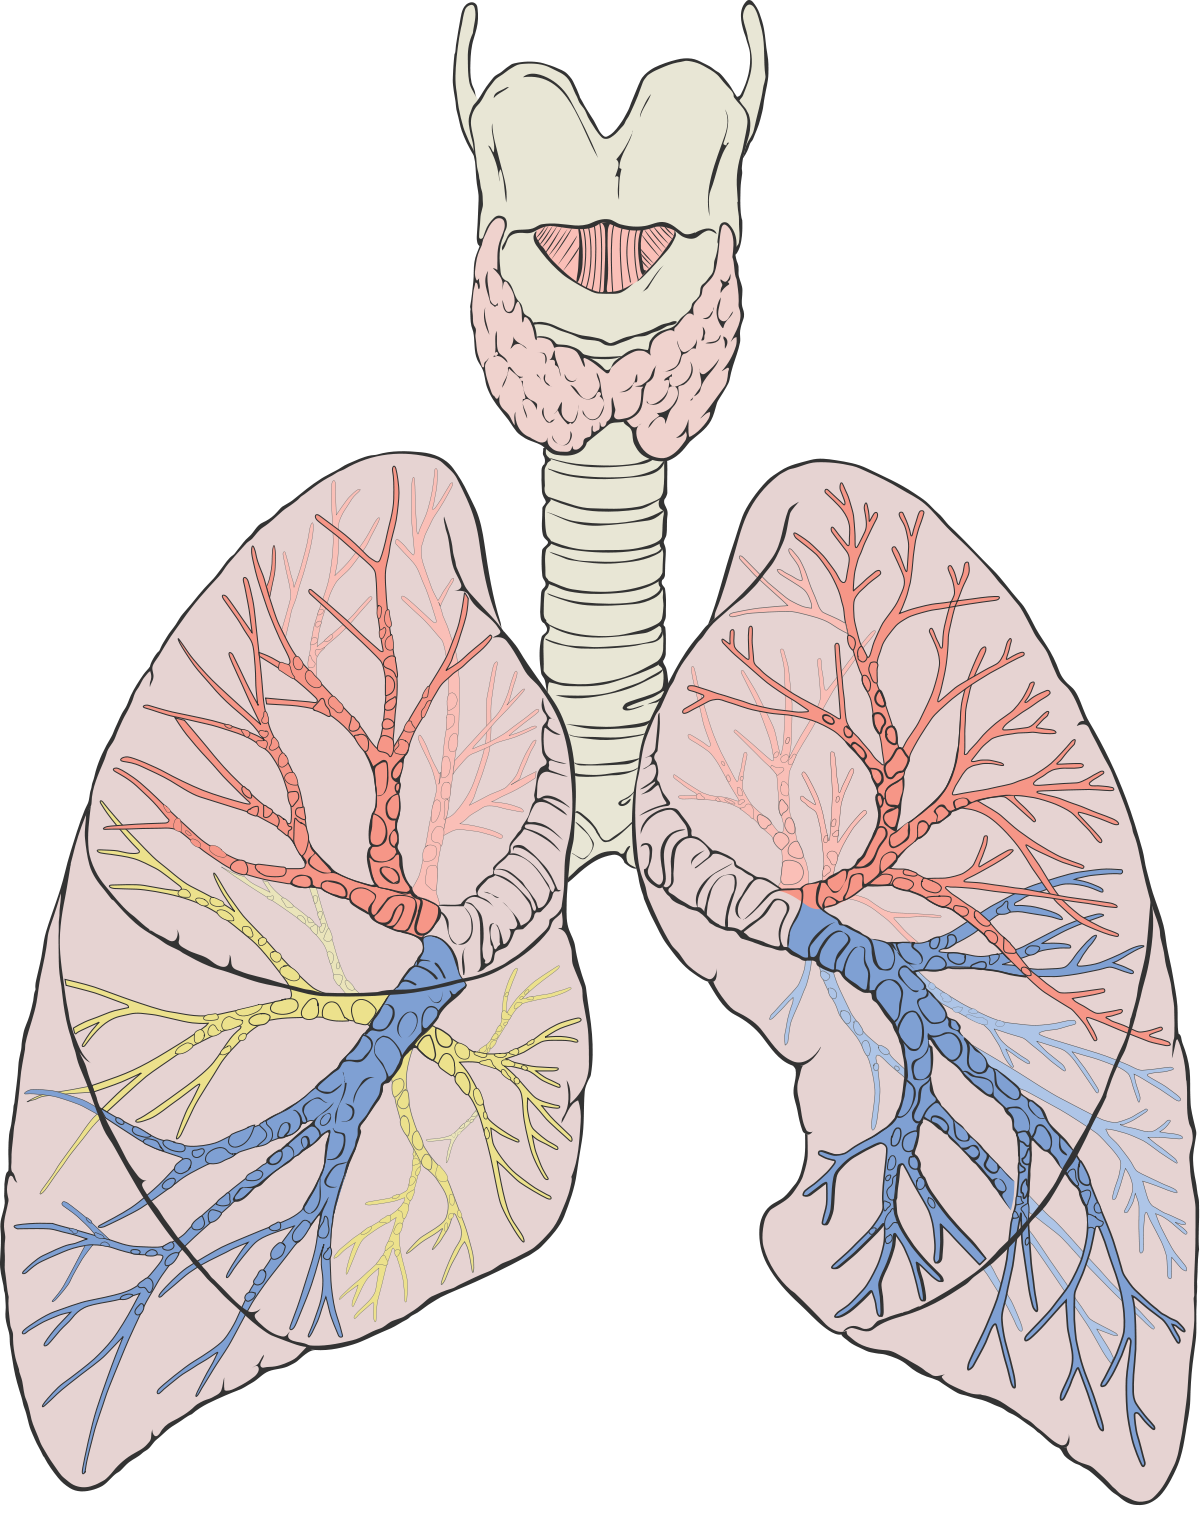 Lung wikipedia . Lungs clipart heart blood vessel